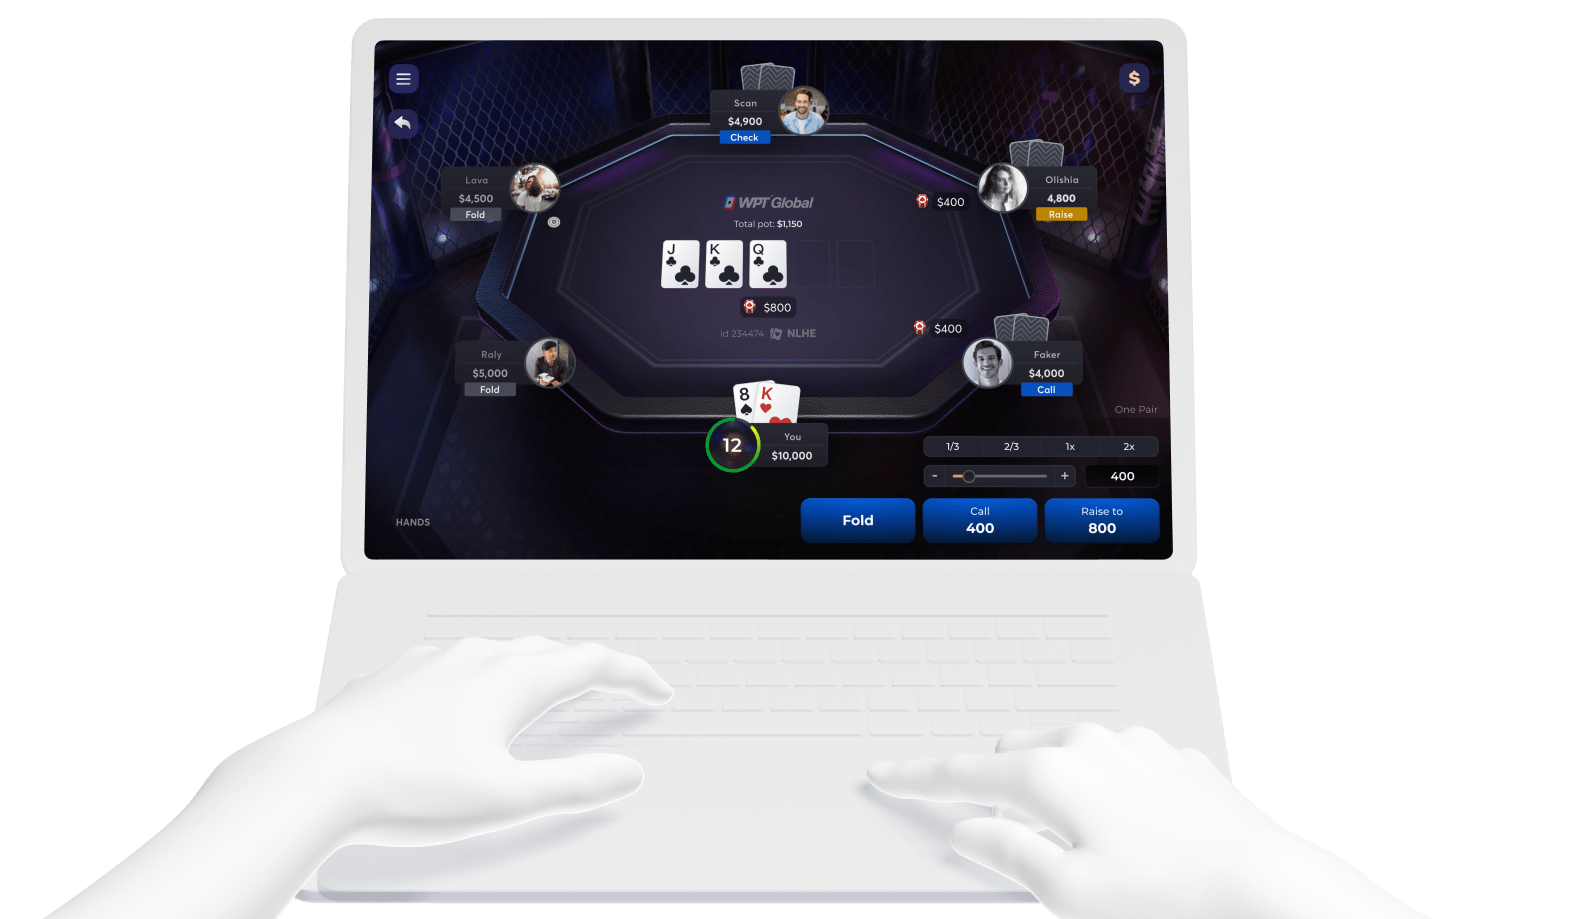 Download and Install WPT Global Application